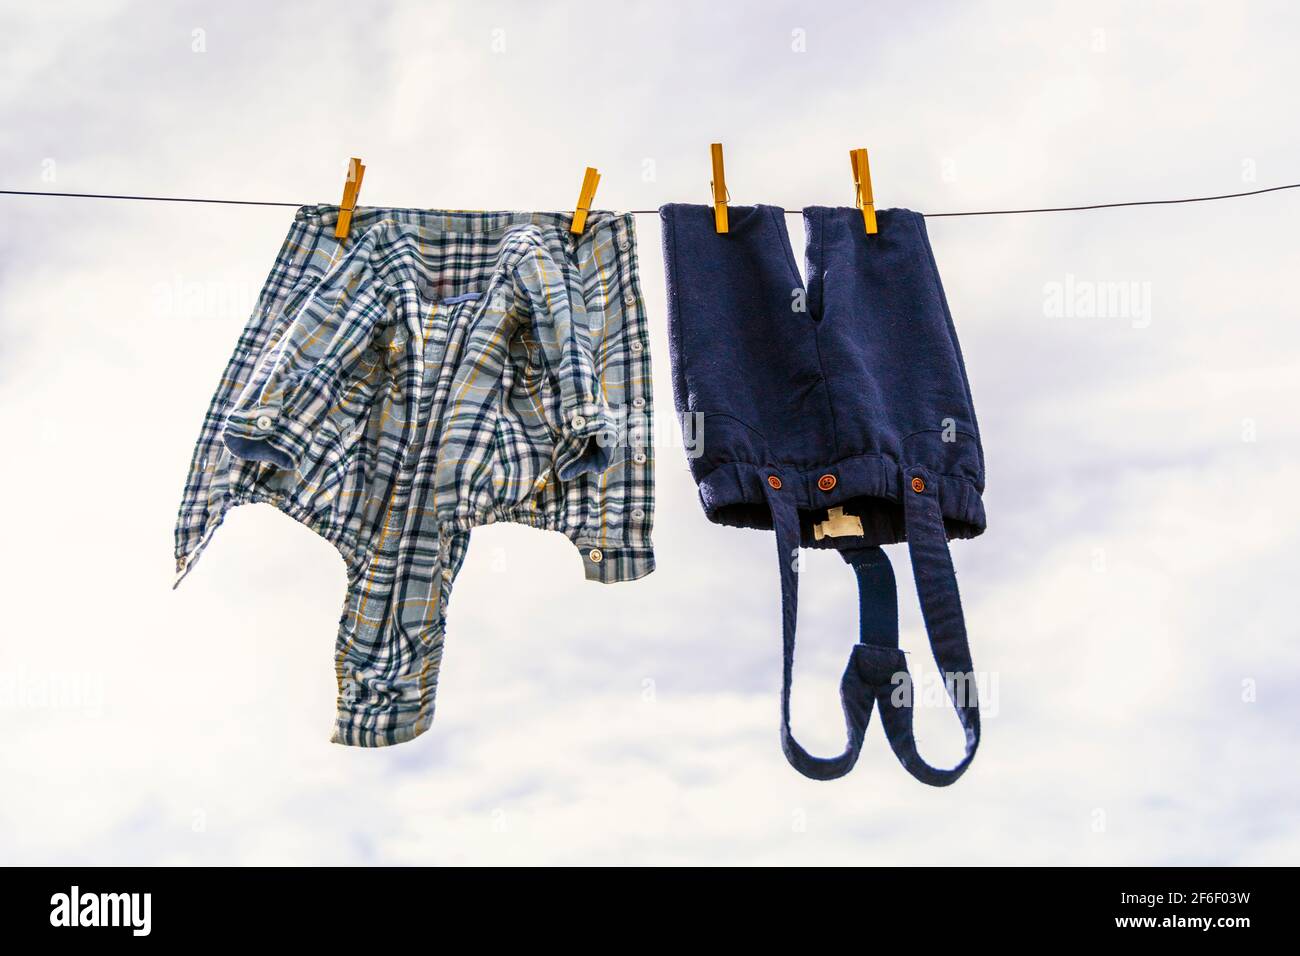 Elegant baby trousers and shirt pinned with wooden pegs against cloudy sky Stock Photo